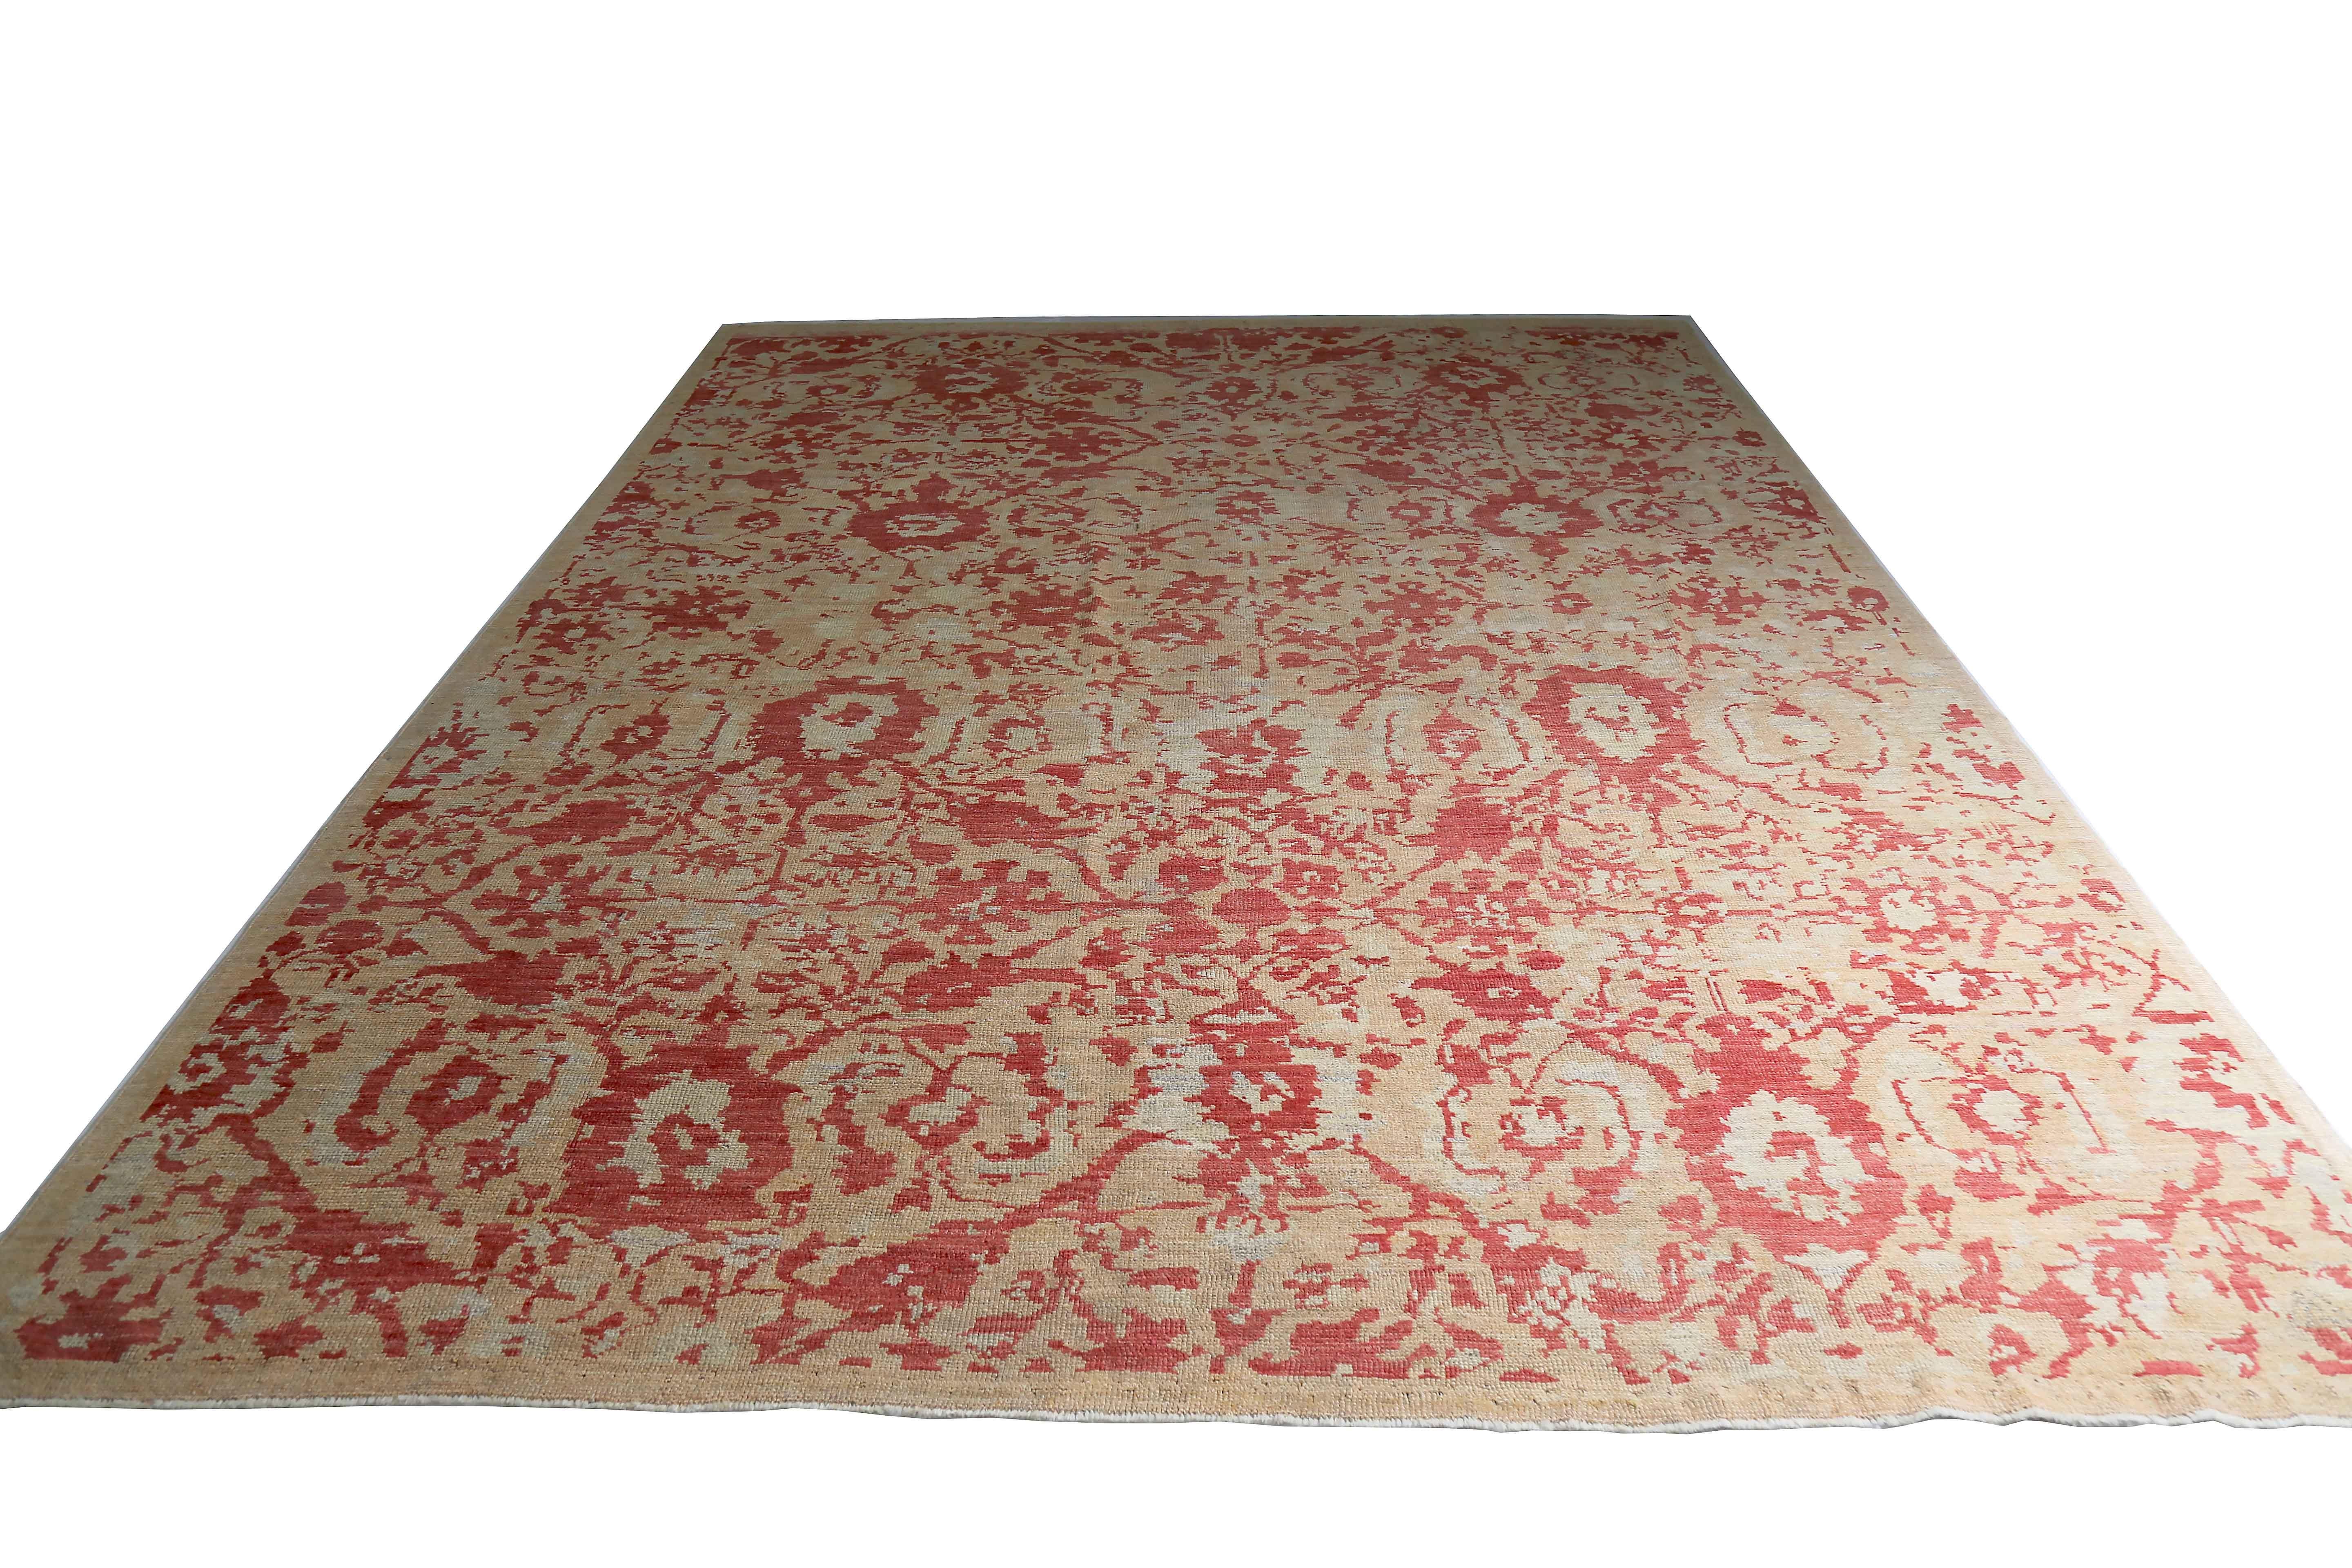 New Turkish rug made of handwoven sheep’s wool of the finest quality. It’s colored with organic vegetable dyes that are certified safe for humans and pets alike. It features floral details in red over a lovely ivory and beige field. Flower patterns